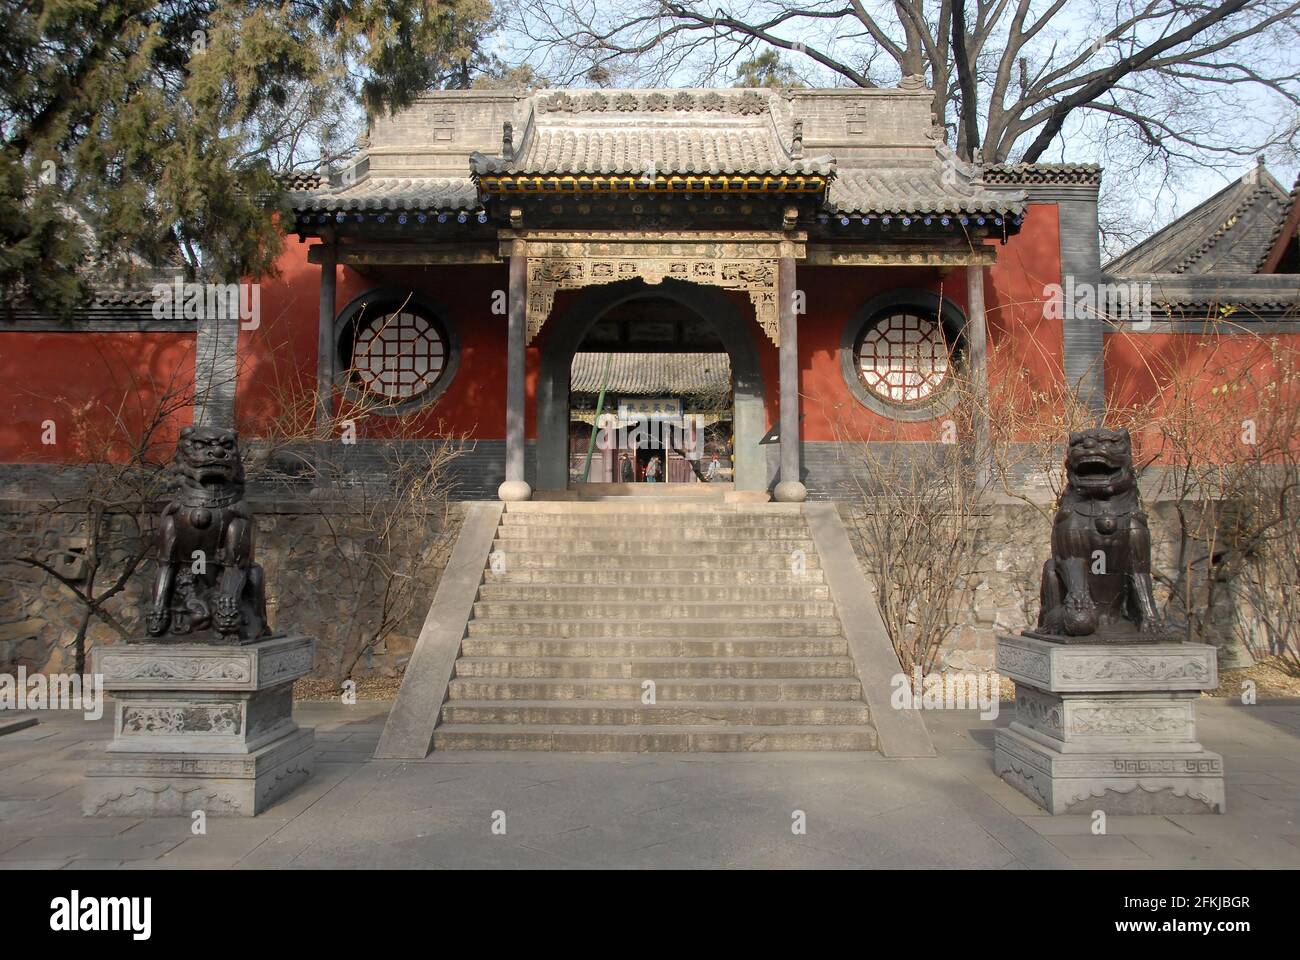 Jinci Temple near Taiyuan, Shanxi, China. Entrance to a courtyard flanked by lion statues within the grounds of Jinci Temple. Stock Photo